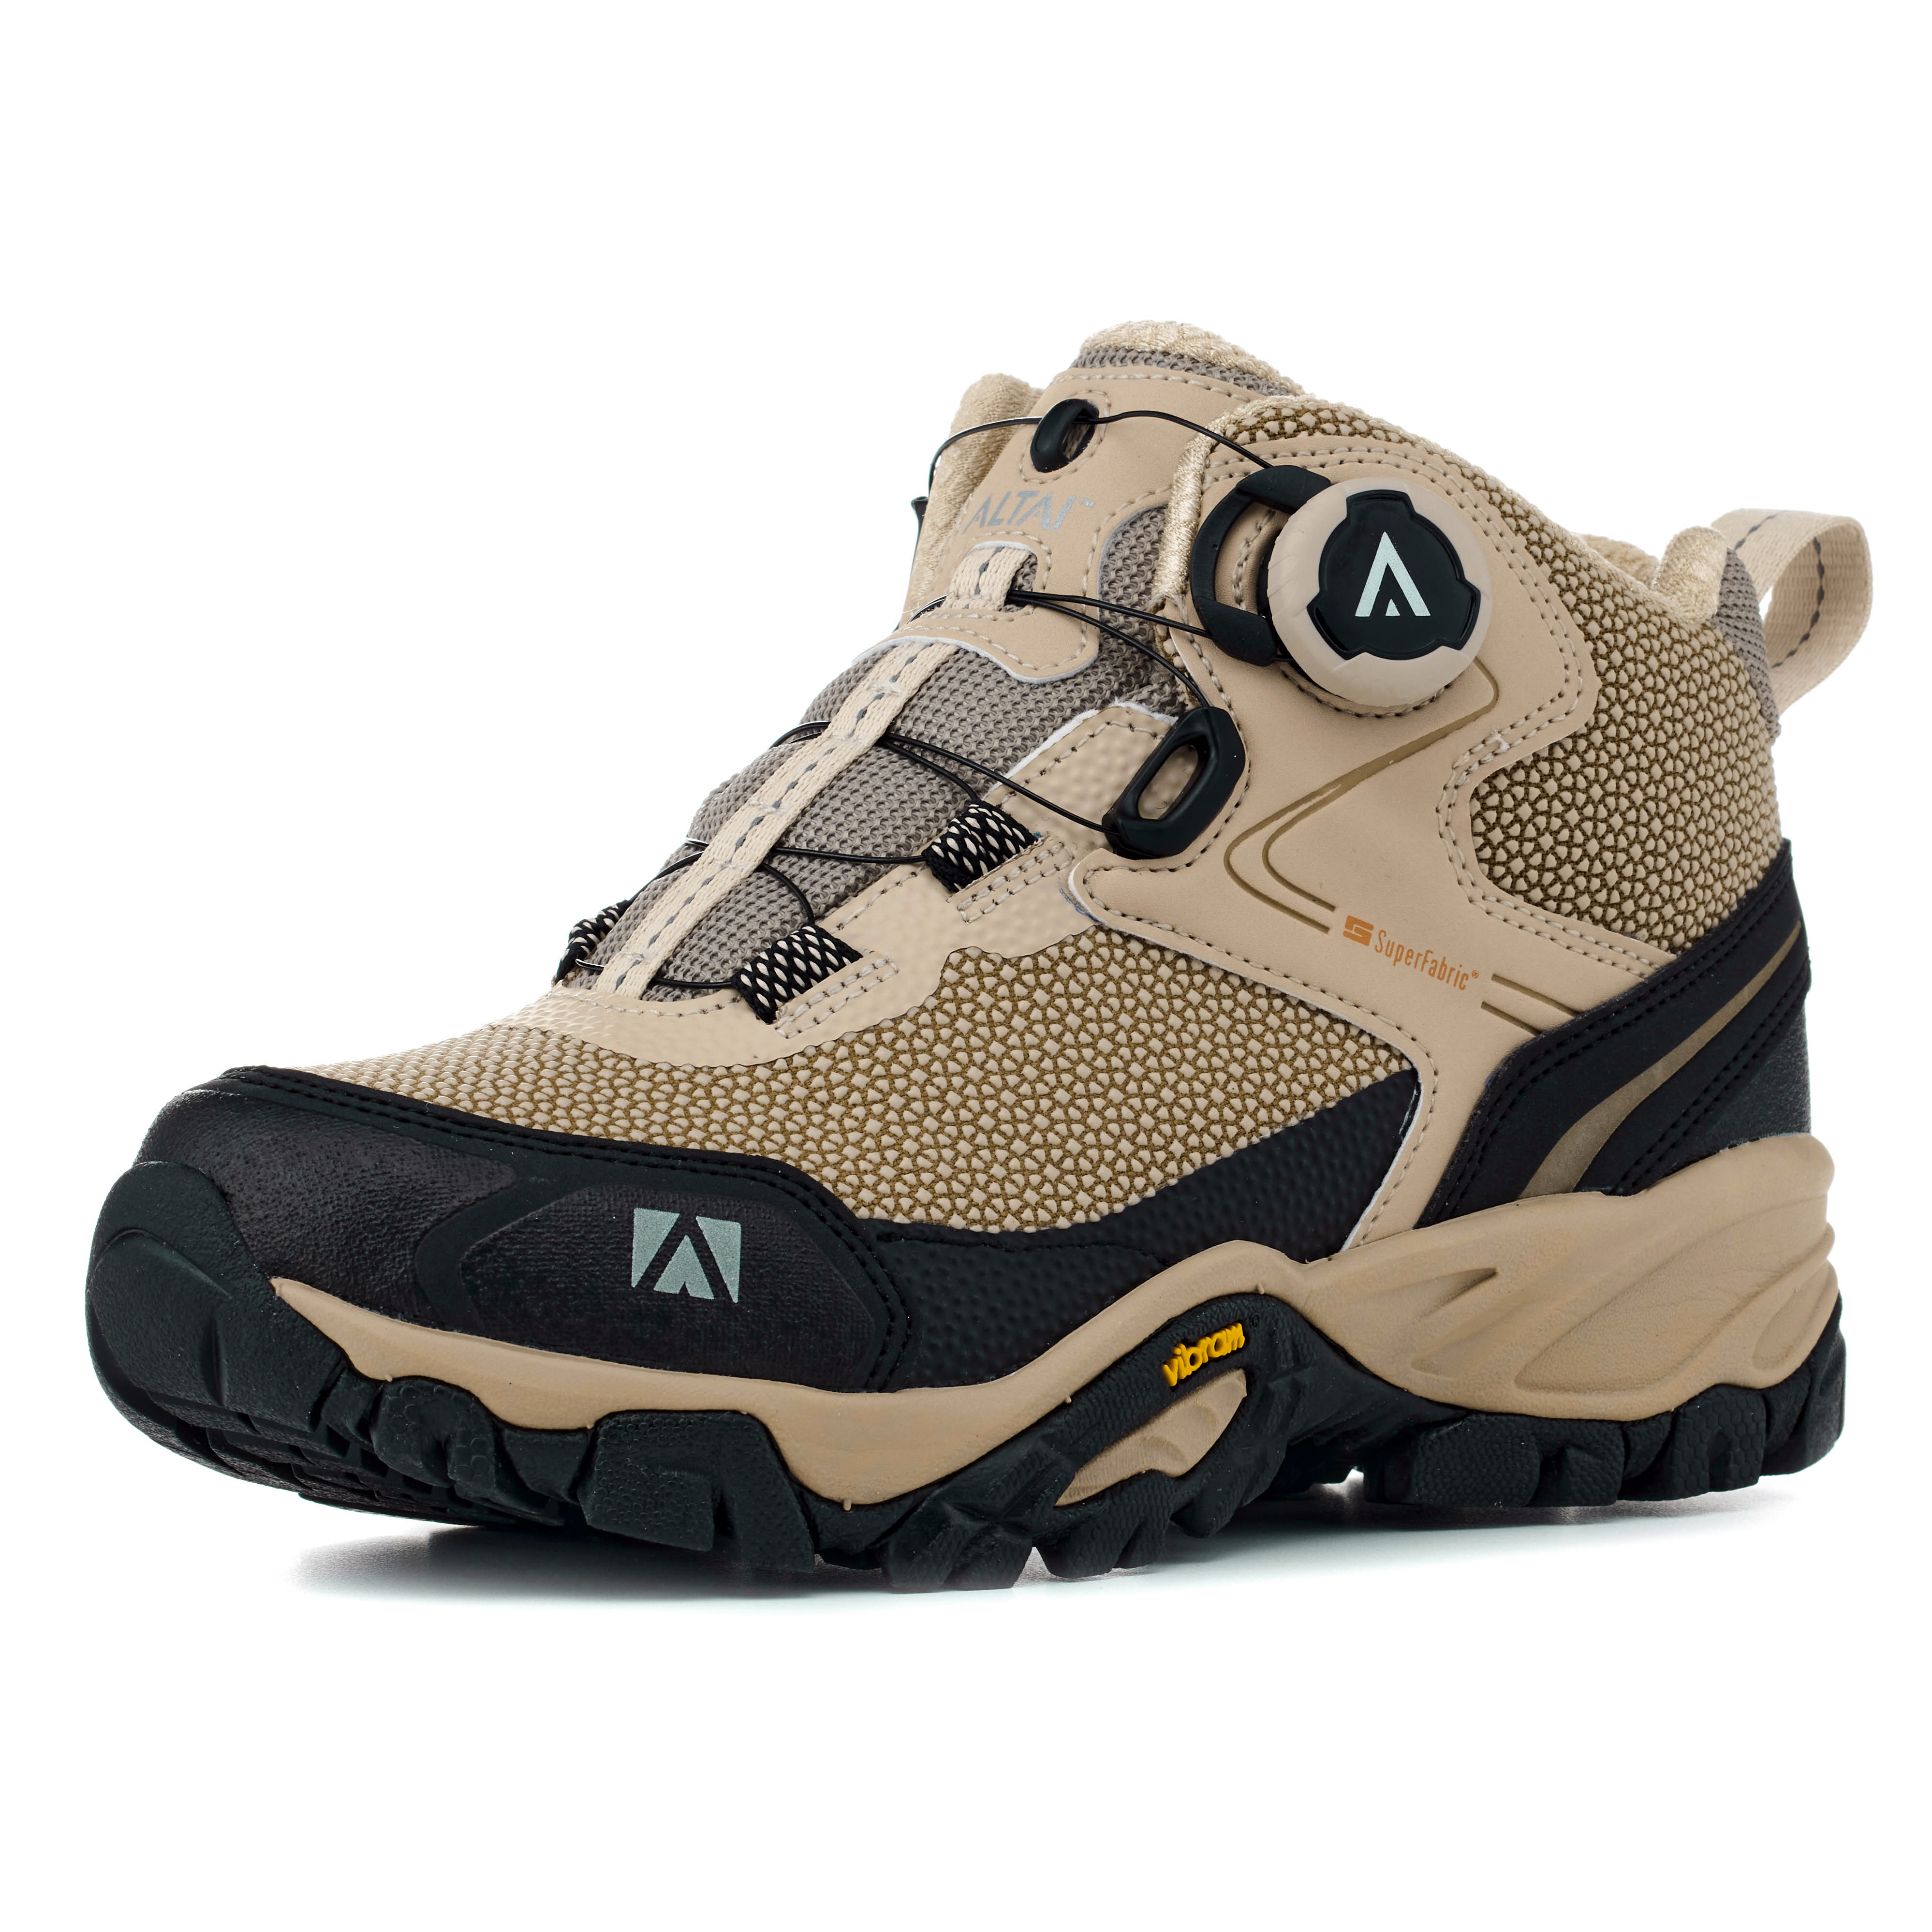 Altai - Volcano Dial-Mid Hiking Trekking Shoes